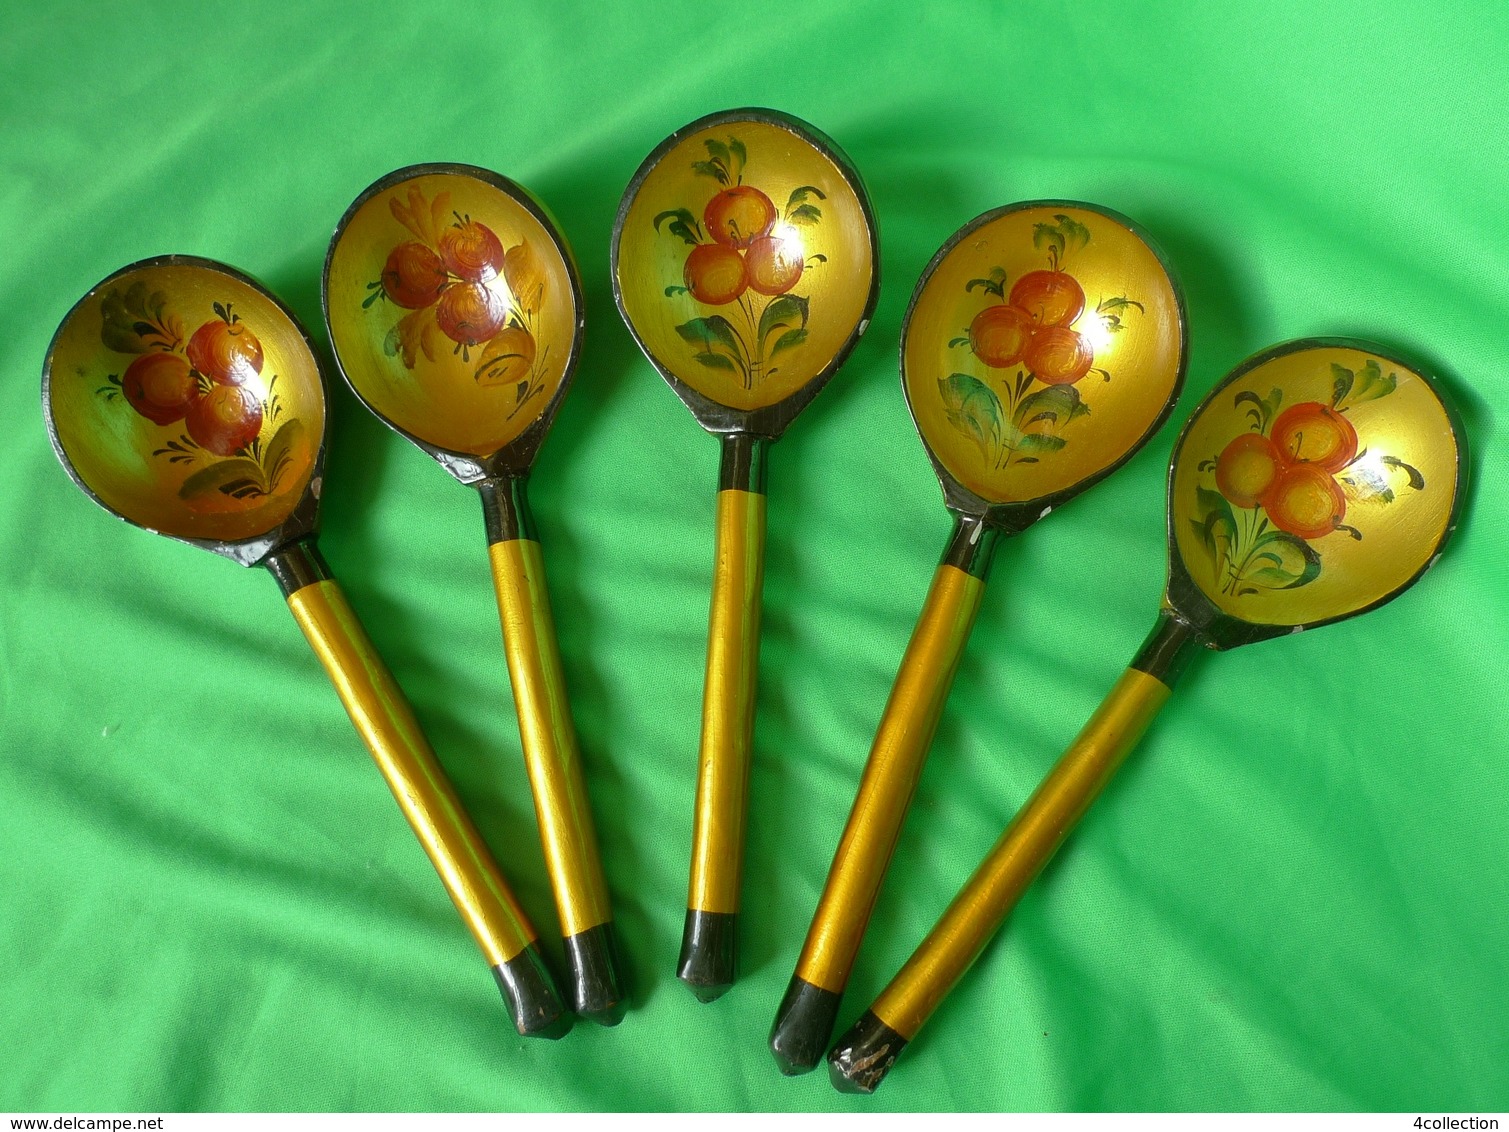 Vintage RUSSIAN Folk Art KHOKHLOMA Hand PAINTED Wooden Spoon 5psc Soviet Cutlery - Spoons